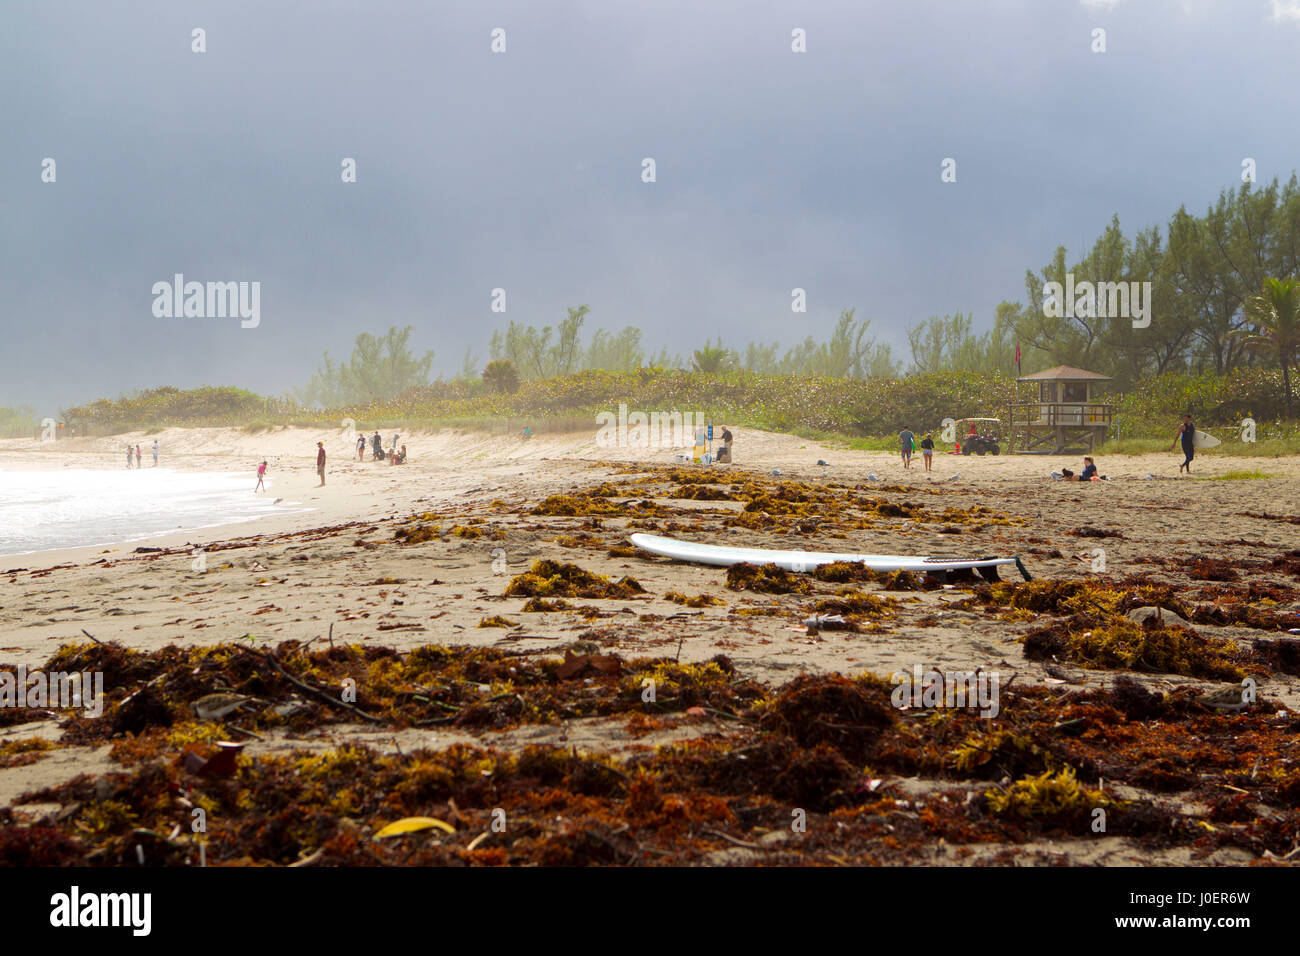 Washed-up seaweed covers a popular surfing beach in Jupiter, Florida. Stock Photo